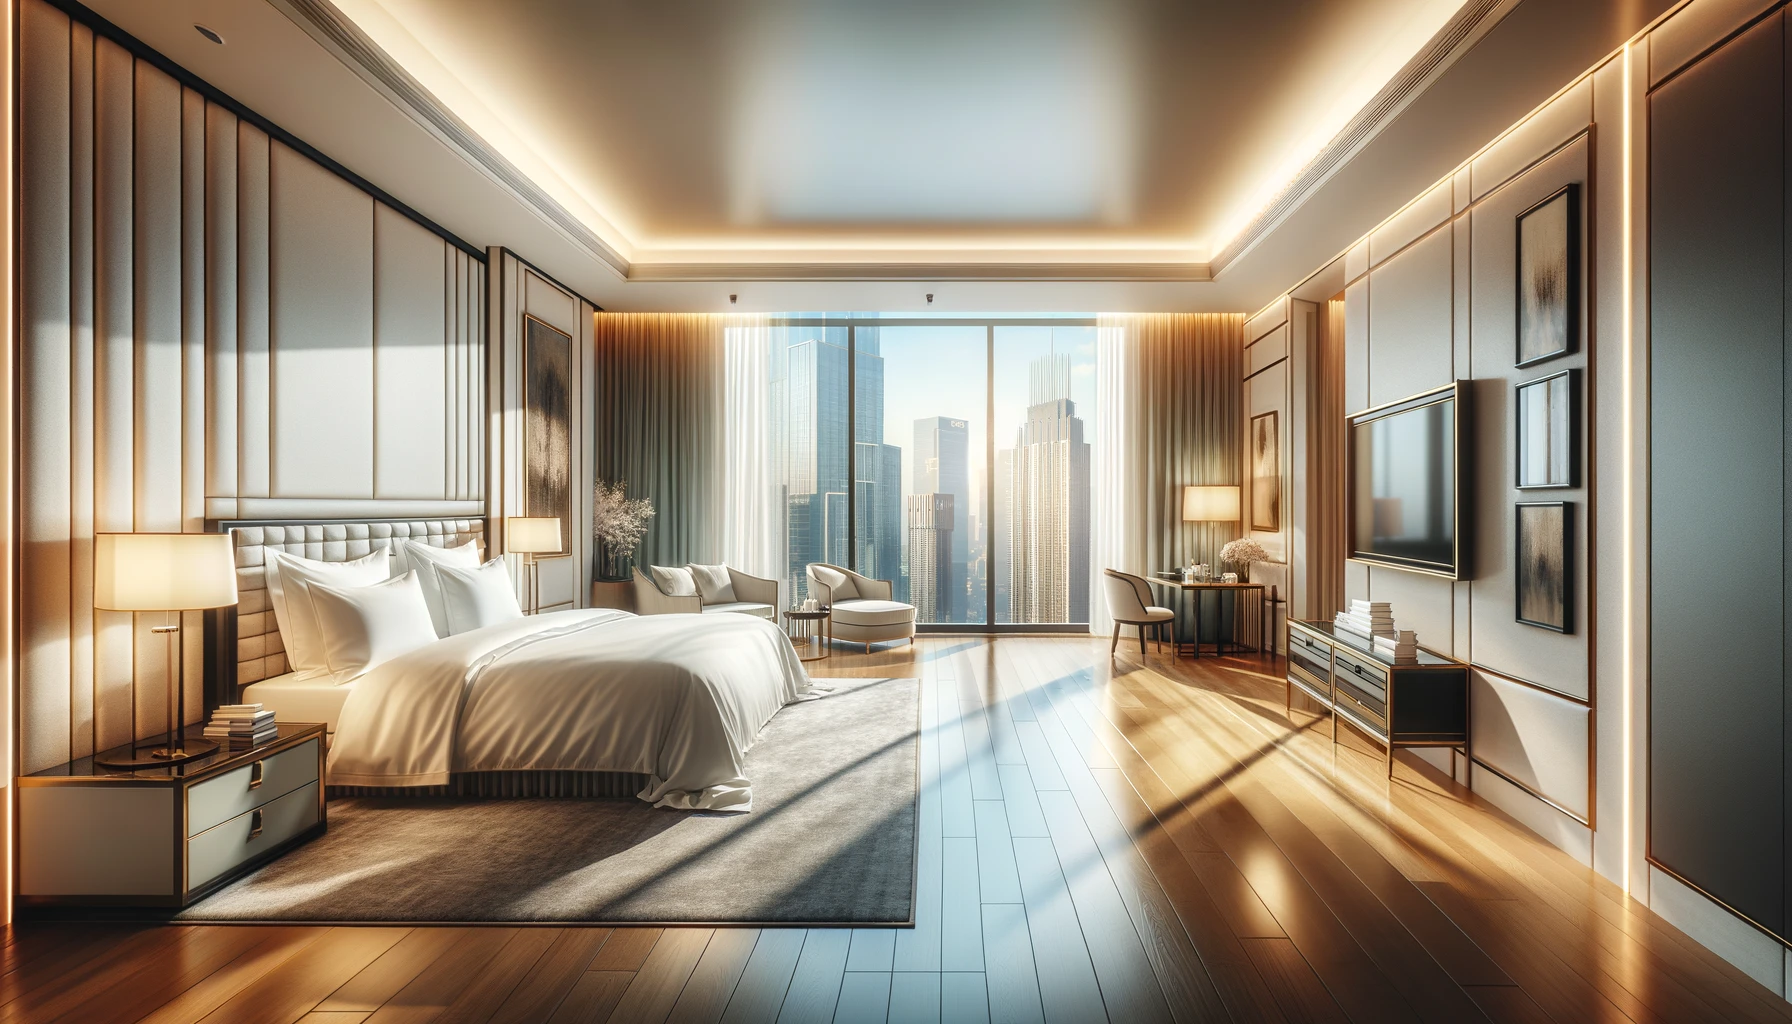 Luxurious bedroom with city skyline view at sunrise.